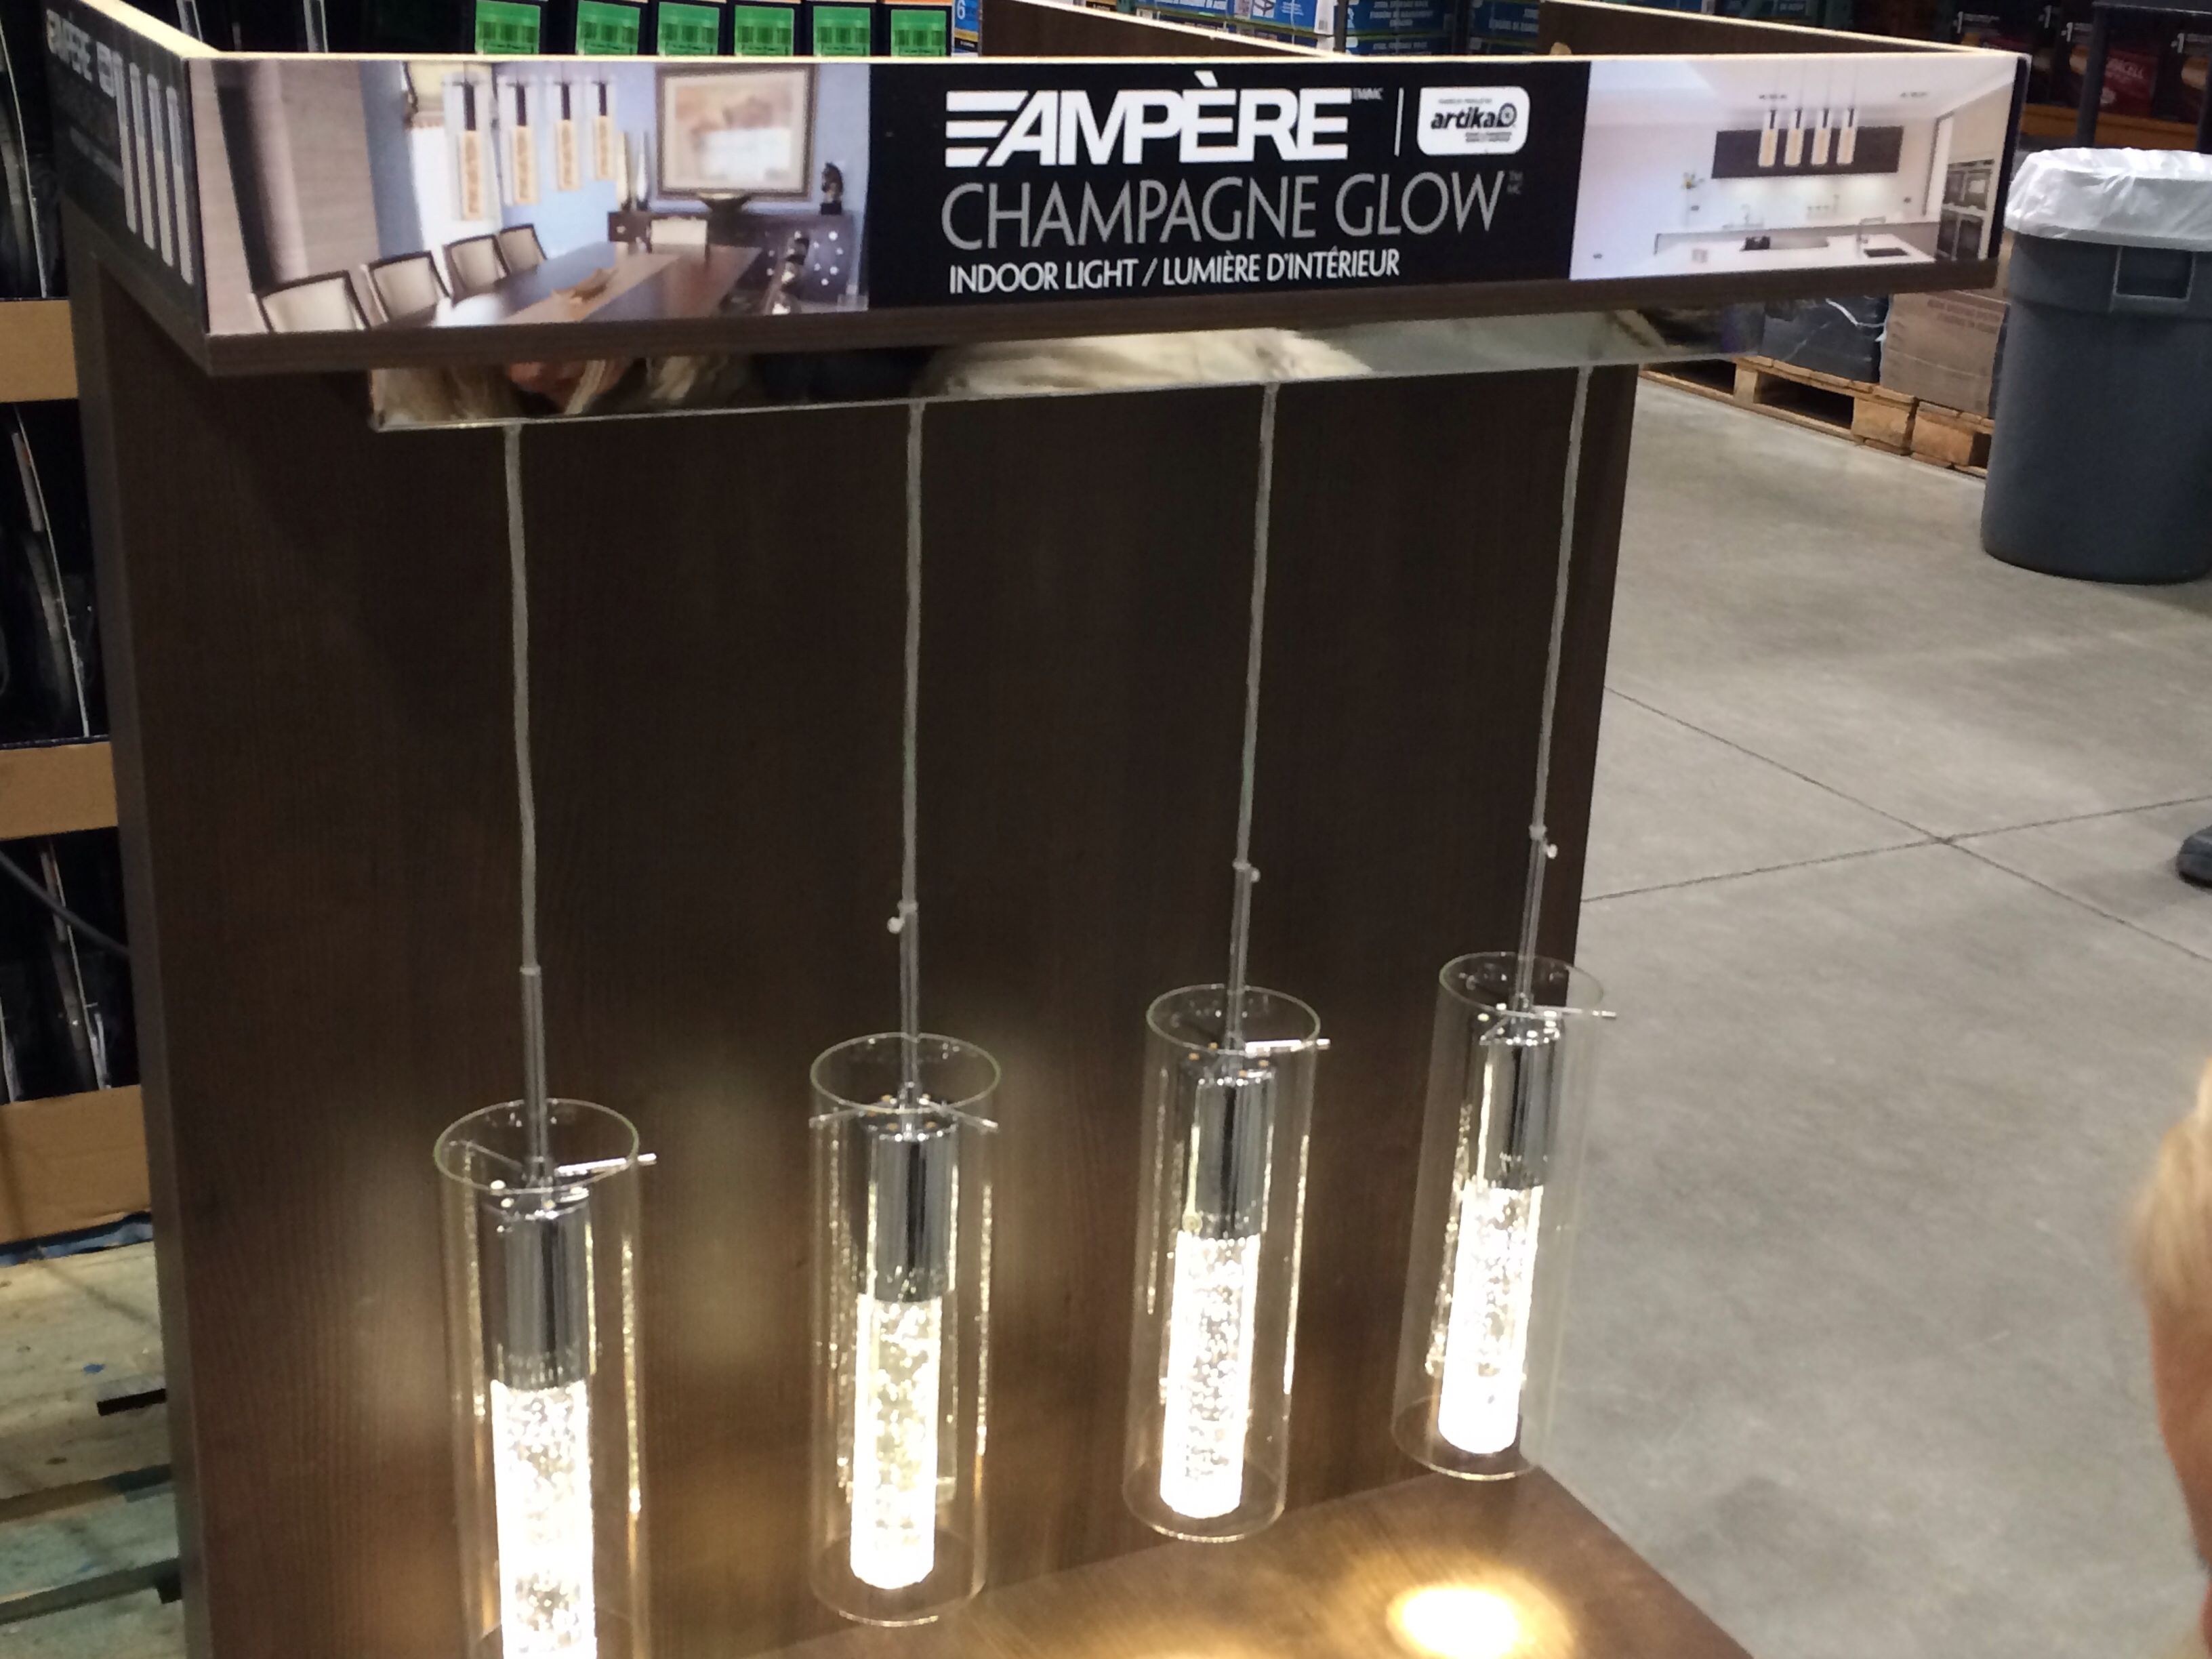 Costco Ampre Champagne Glow Indoor Light Would Look Amazing Throughout Costco Lighting Chandeliers (View 2 of 14)